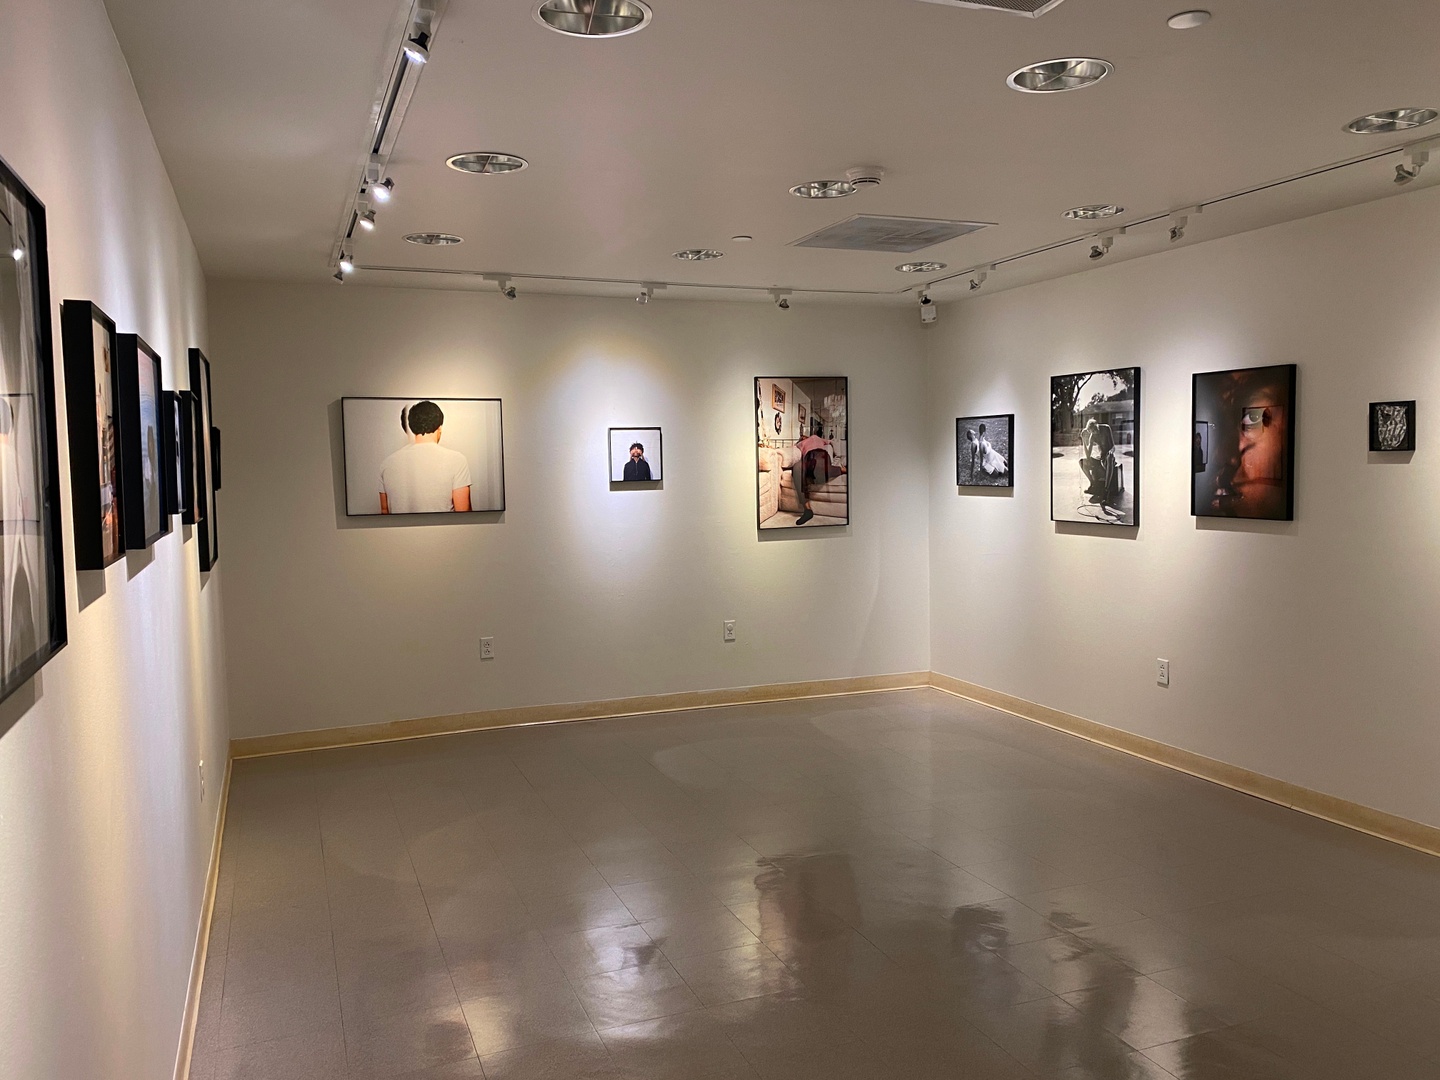 Gallery view of several portrait photographs, installed on three gallery walls.